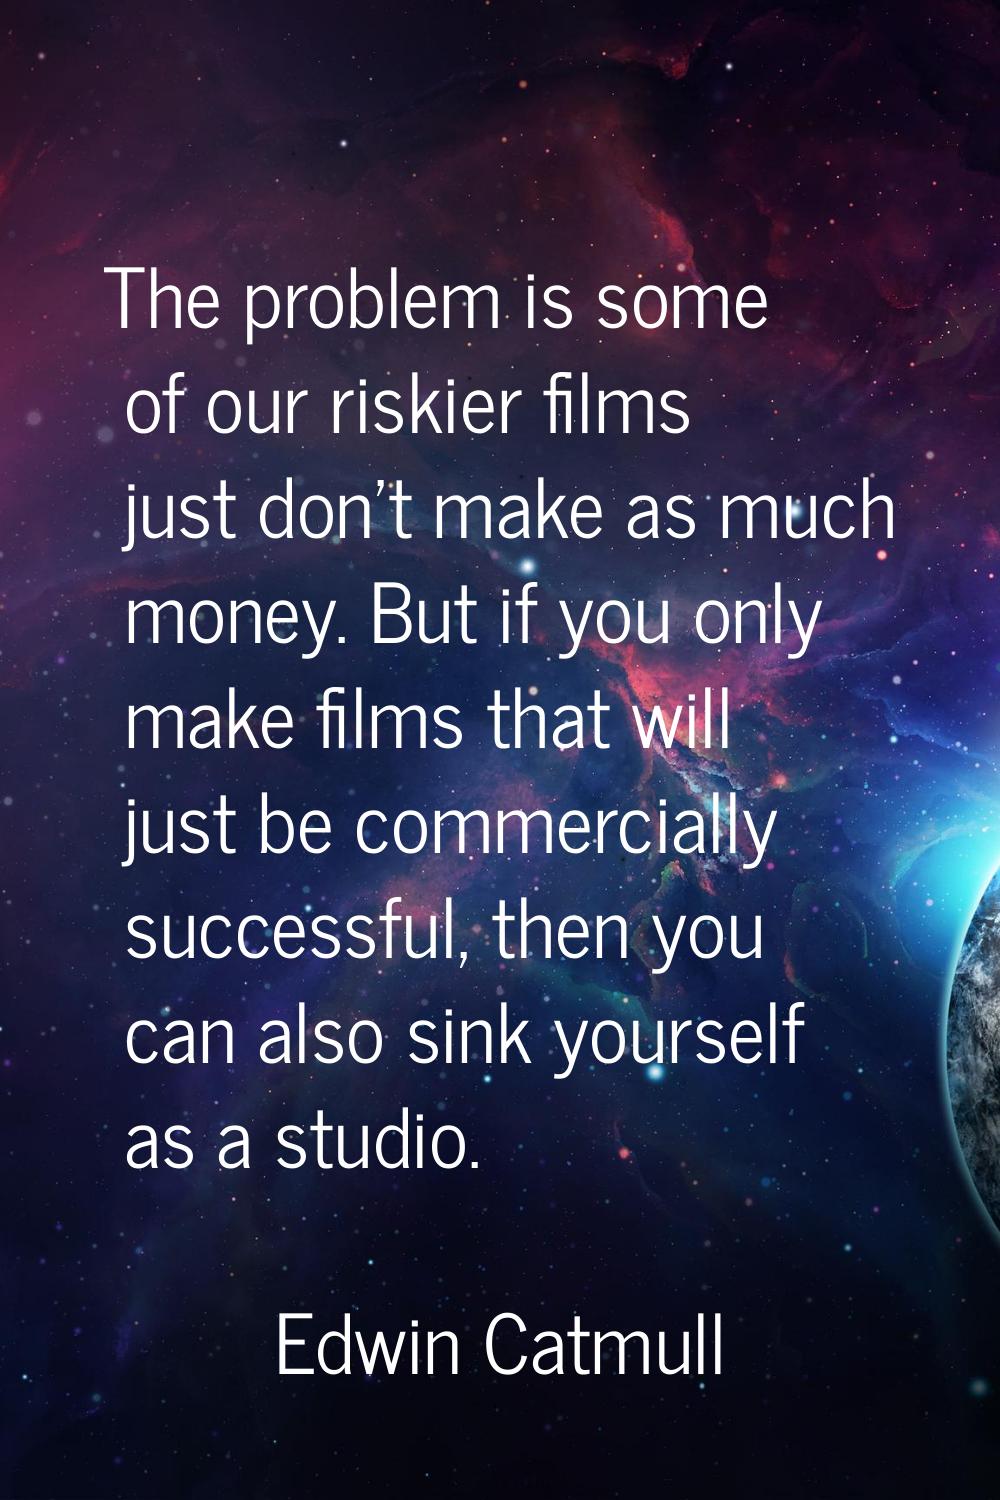 The problem is some of our riskier films just don't make as much money. But if you only make films 